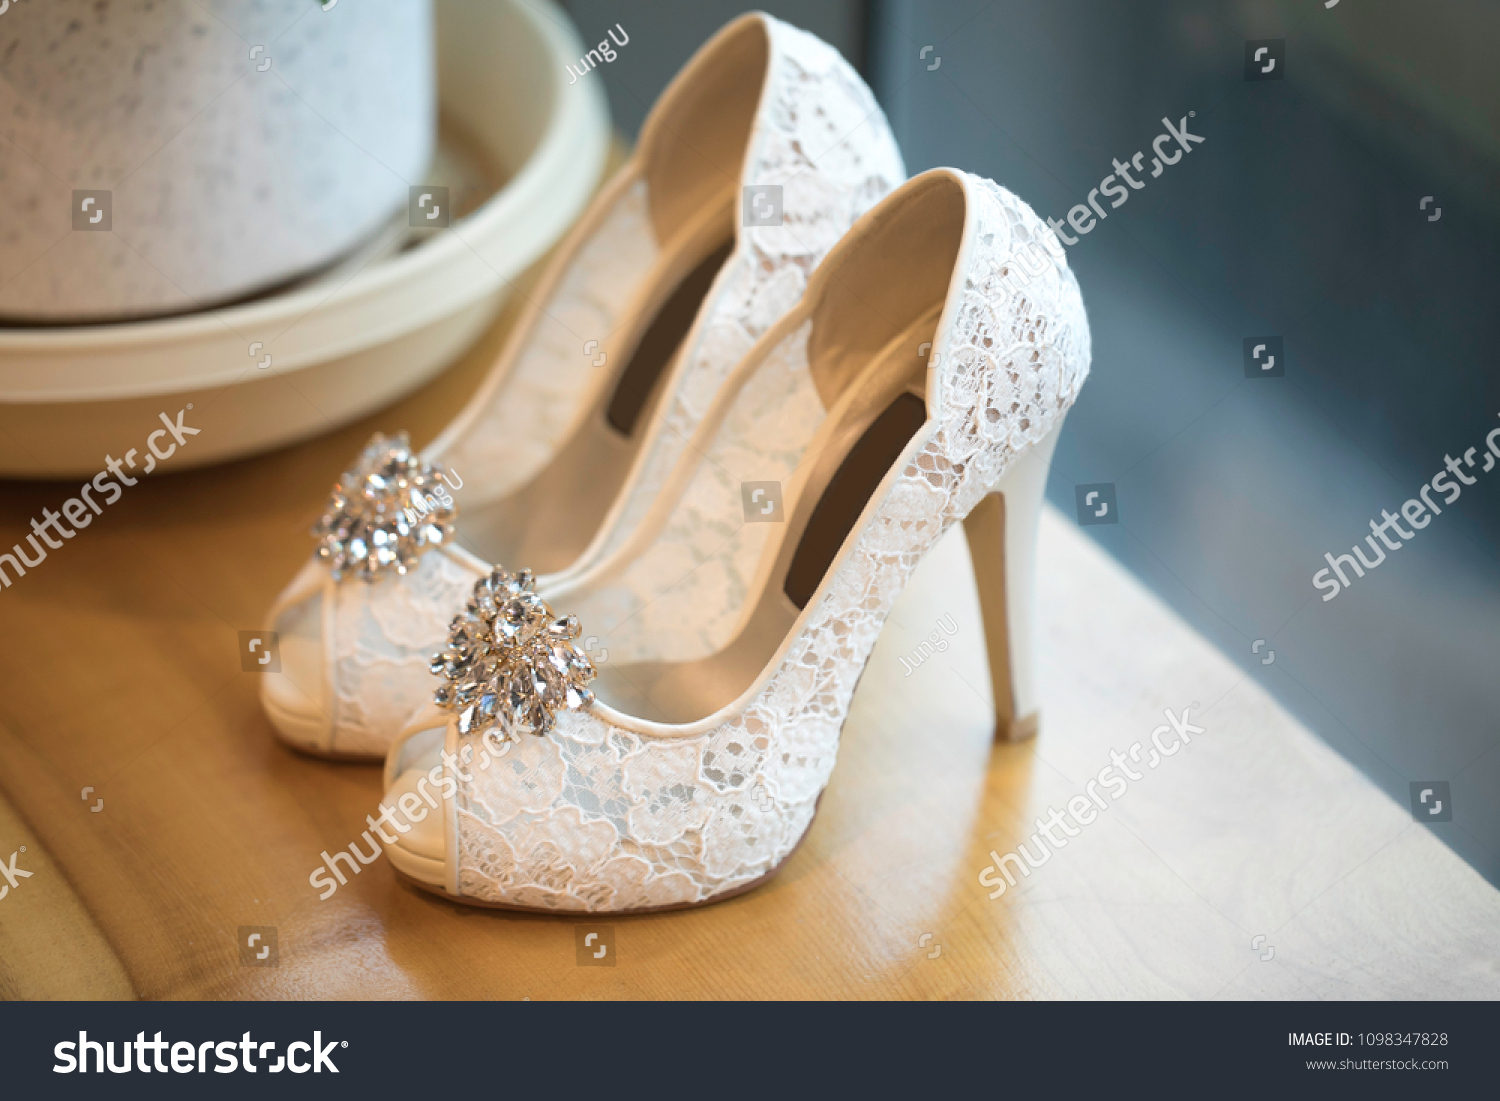 Beautiful wedding shoes in front of the window background #1098347828